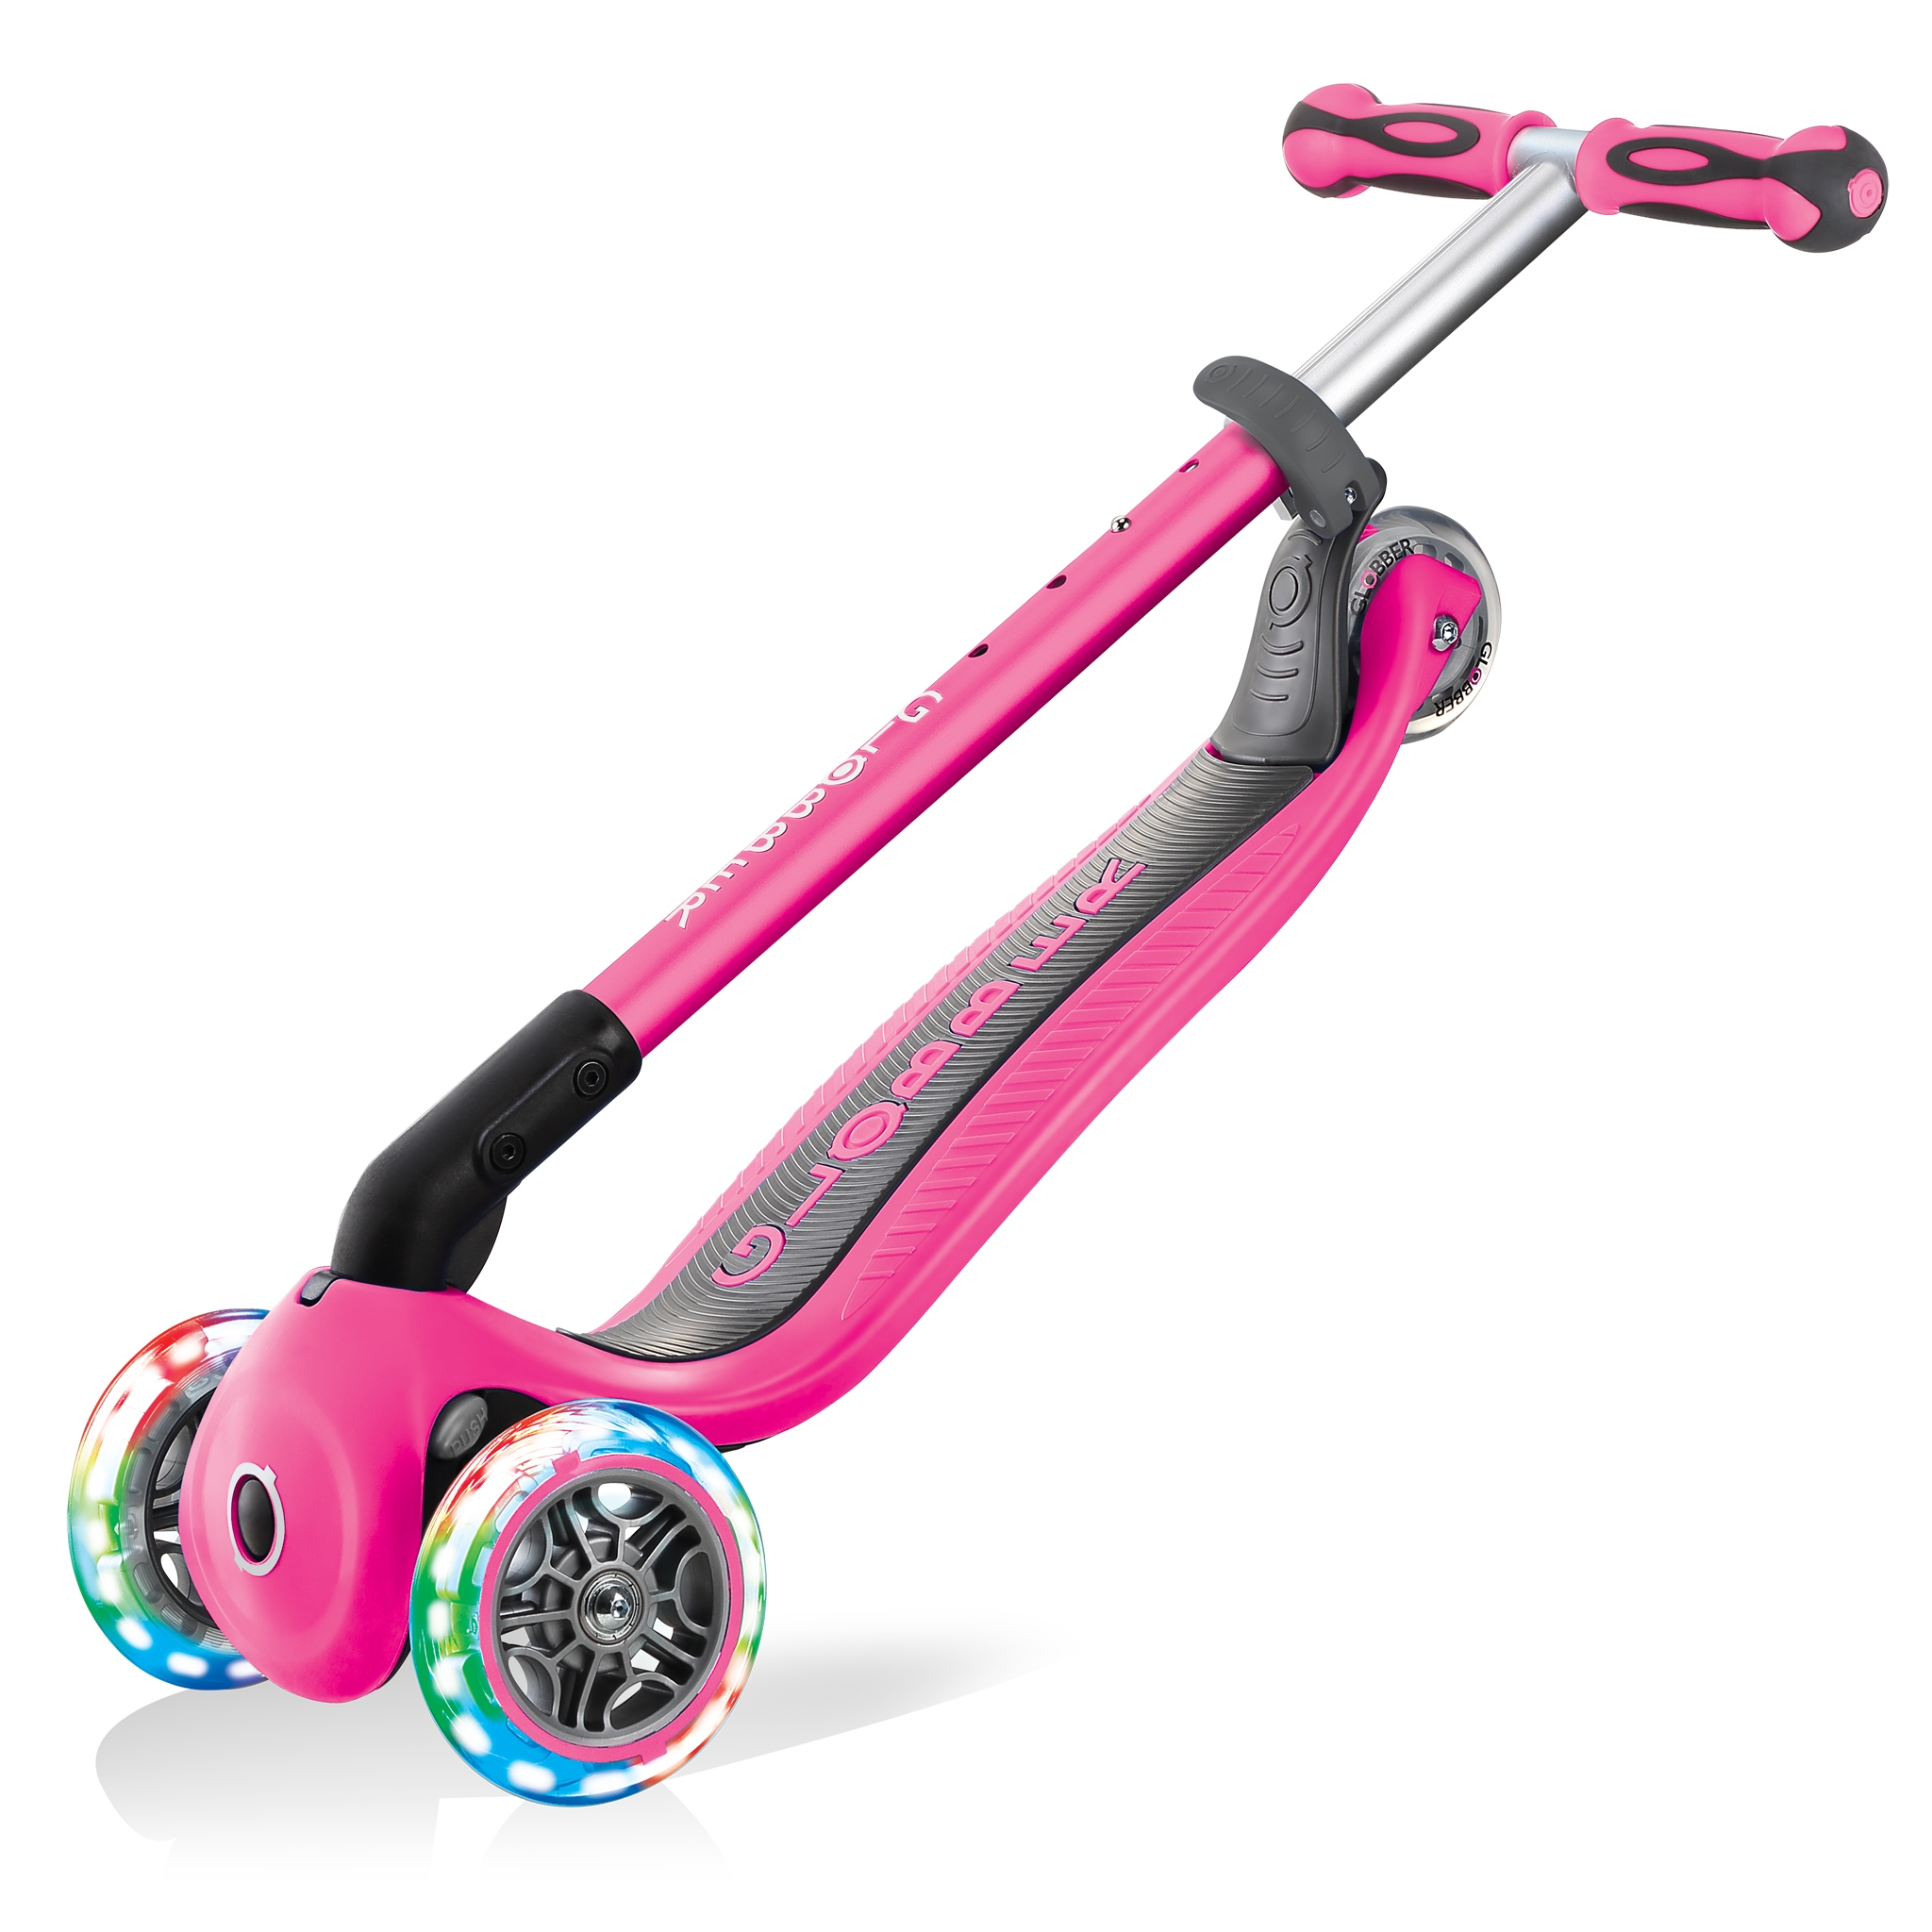 GO-UP-DELUXE-LIGHTS-ride-on-walking-bike-scooter-with-light-up-wheels-trolley-mode-compatible-deep-pink 5